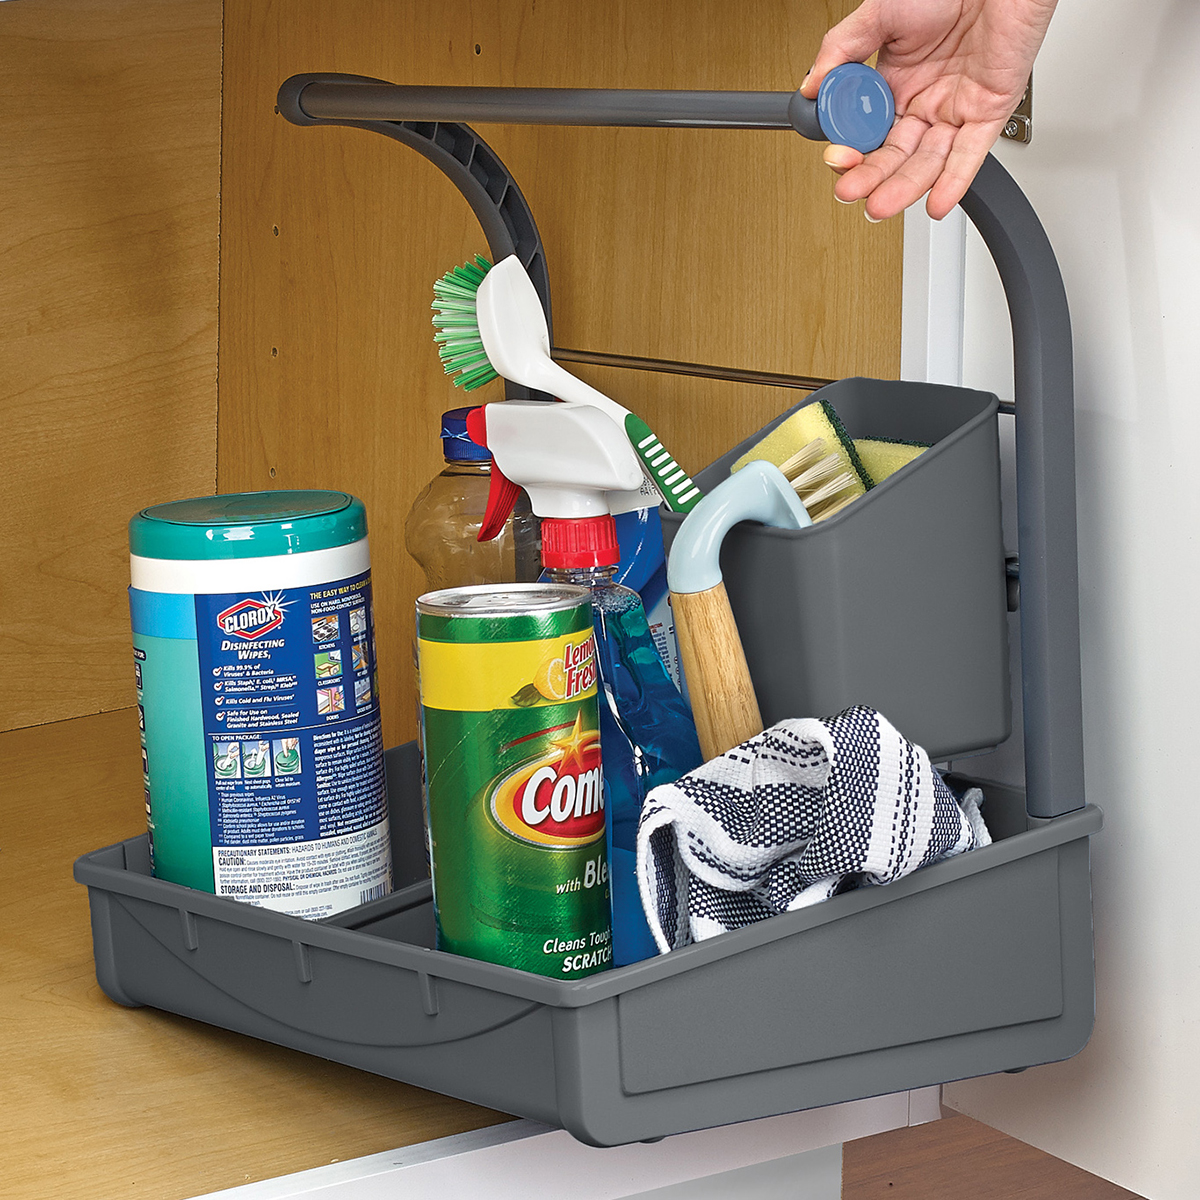 Polder 2-Tier Storage Caddy, Kitchen and Bathroom Organization and Storage,  Under Sink Organizer with Plastic Shelves, Easy-to-Assemble Caddy